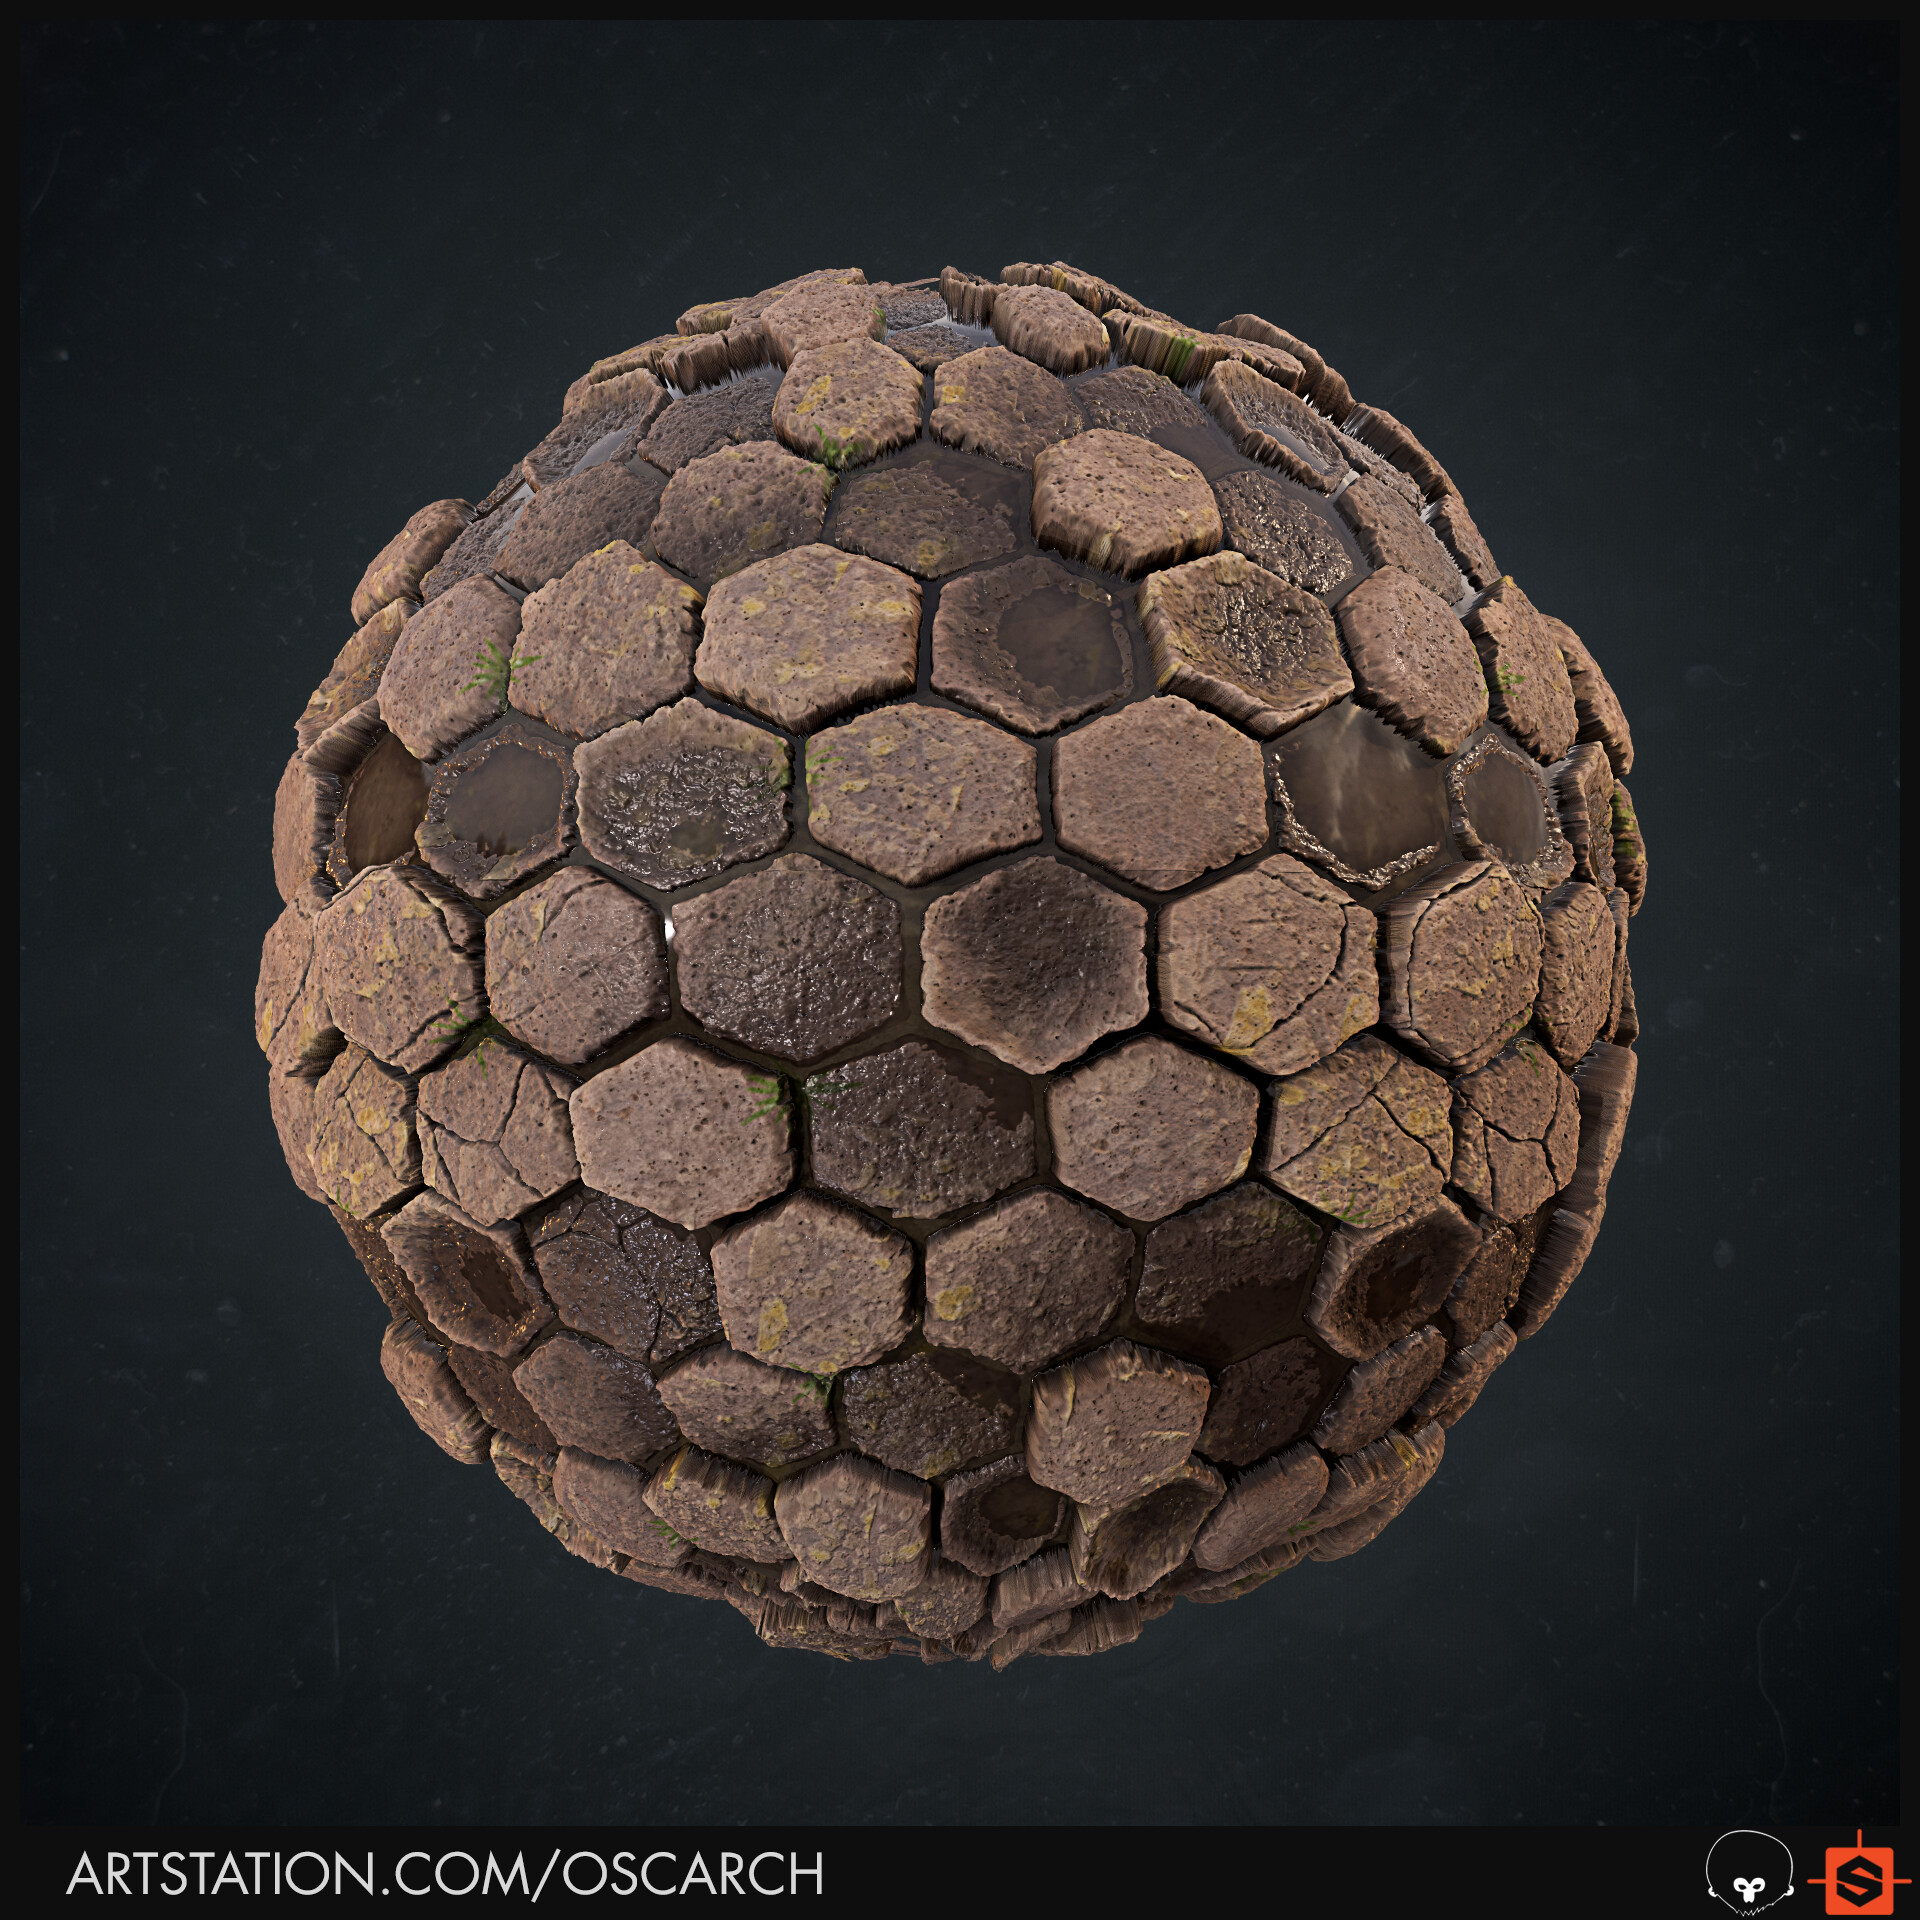 ArtStation - Giant's Causeway Material : My first PBR material